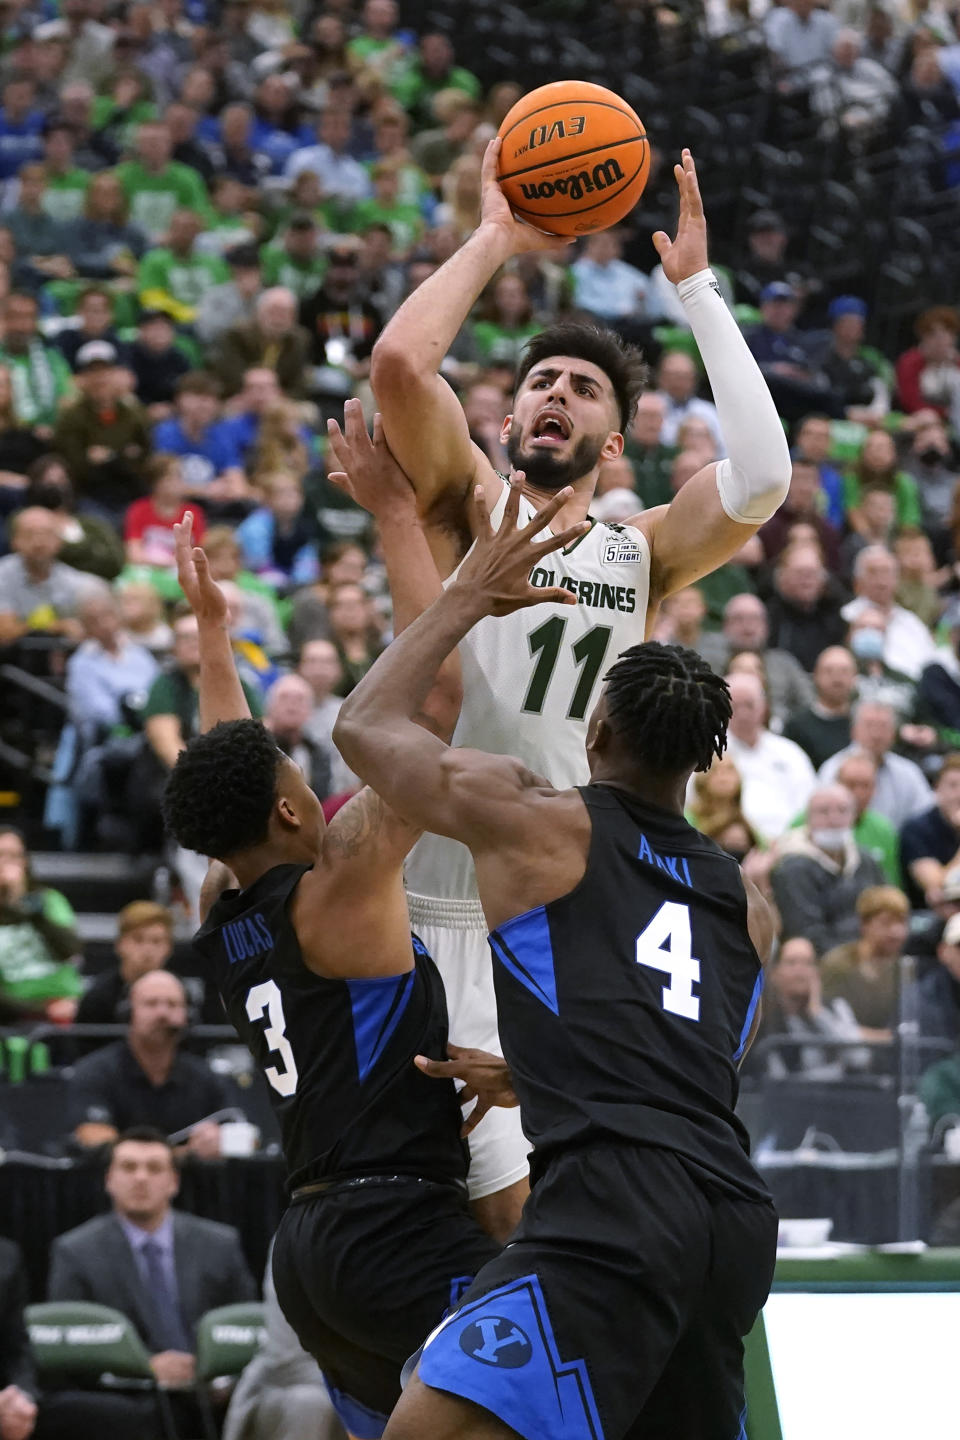 FILE - Utah Valley center Fardaws Aimaq (11) shoots as BYU's Te'Jon Lucas (3) and Atiki Ally Atiki (4) defend during the second half of an NCAA college basketball game Wednesday, Dec. 1, 2021, in Orem, Utah. Aimaq ended up transferring to Texas Tech in the hopes of raising his NBA draft profile this season. (AP Photo/Rick Bowmer, File)